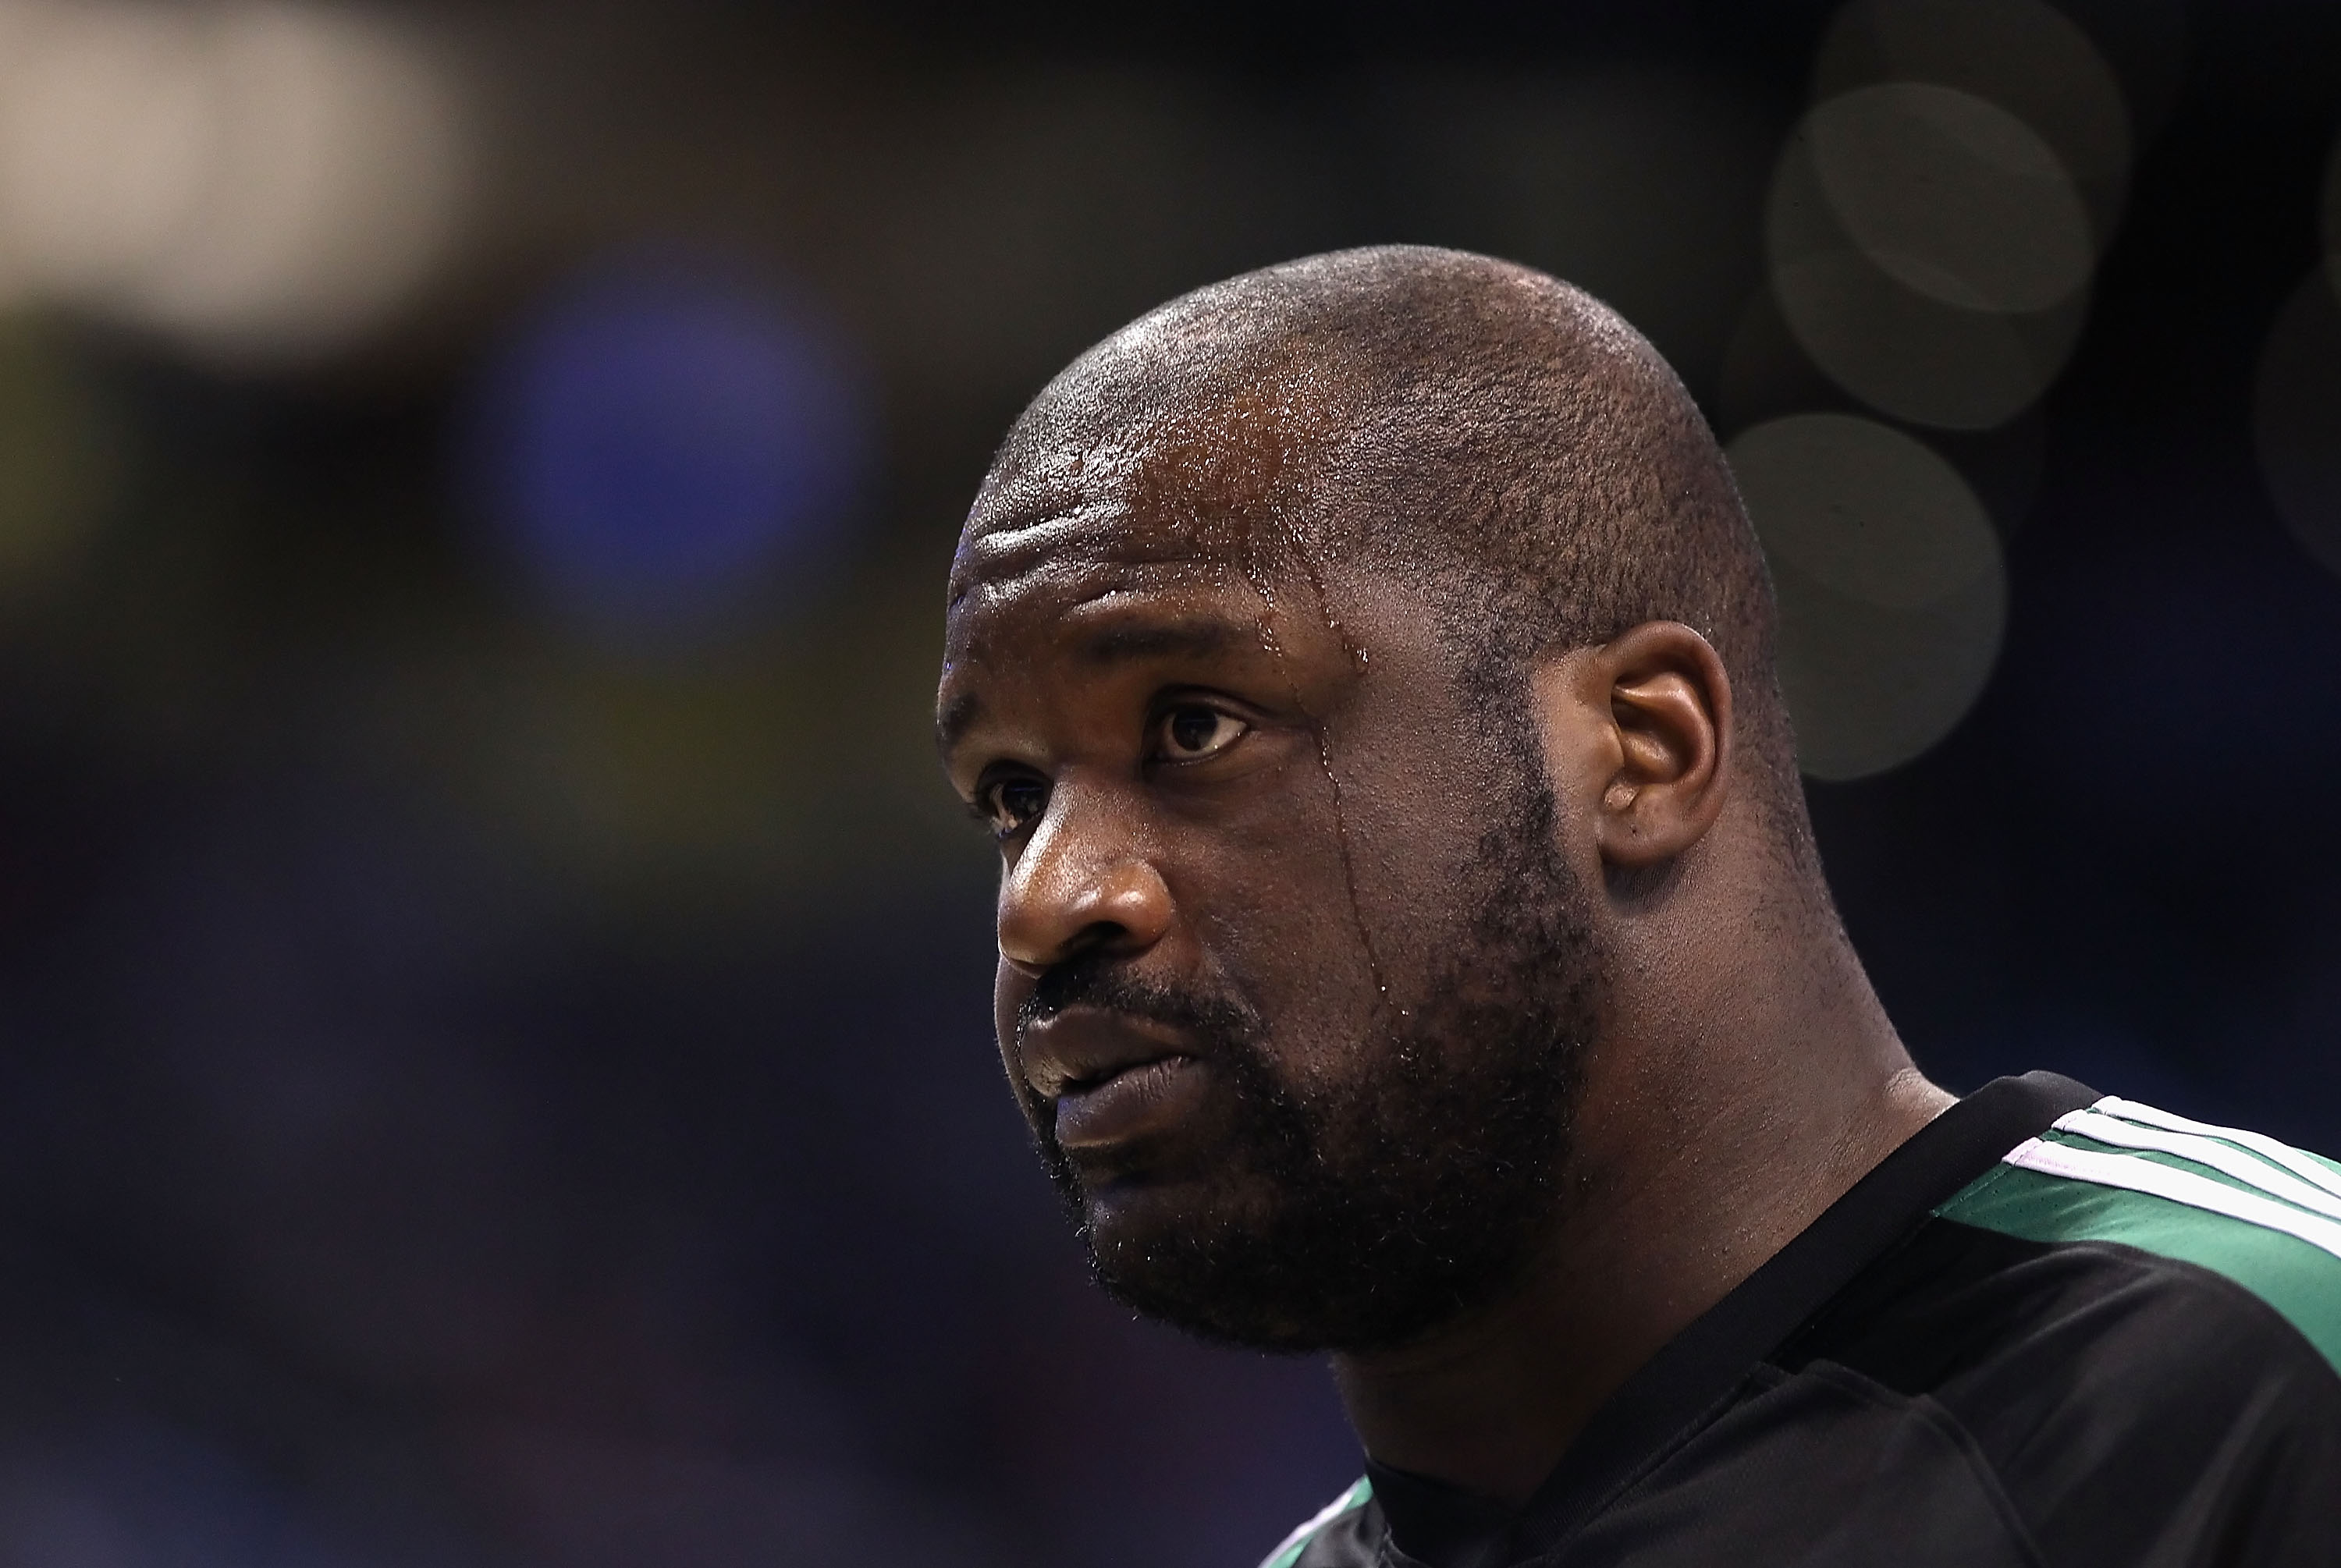 PHOENIX, AZ - JANUARY 28:  Shaquille O'Neal #36 of the Boston Celtics warm up before the NBA game against the Phoenix Suns at US Airways Center on January 28, 2011 in Phoenix, Arizona. The Suns defeated the Celtics 88-71. NOTE TO USER: User expressly ackn